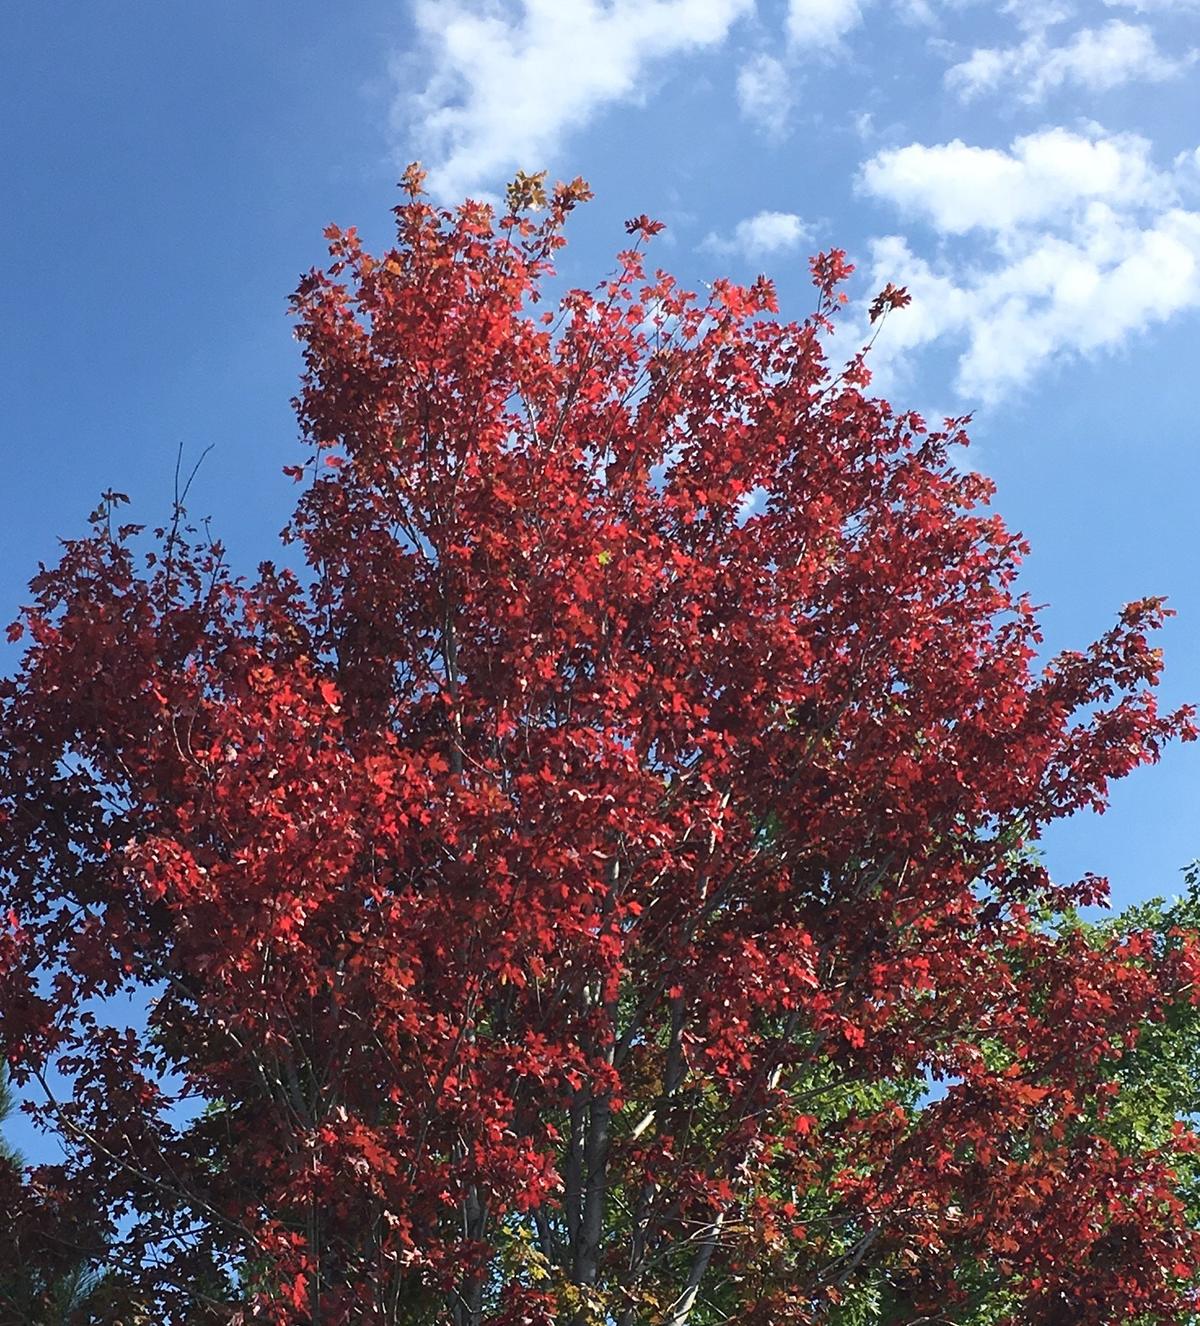 Red maple leaves on tree with blue sky and clouds in background.